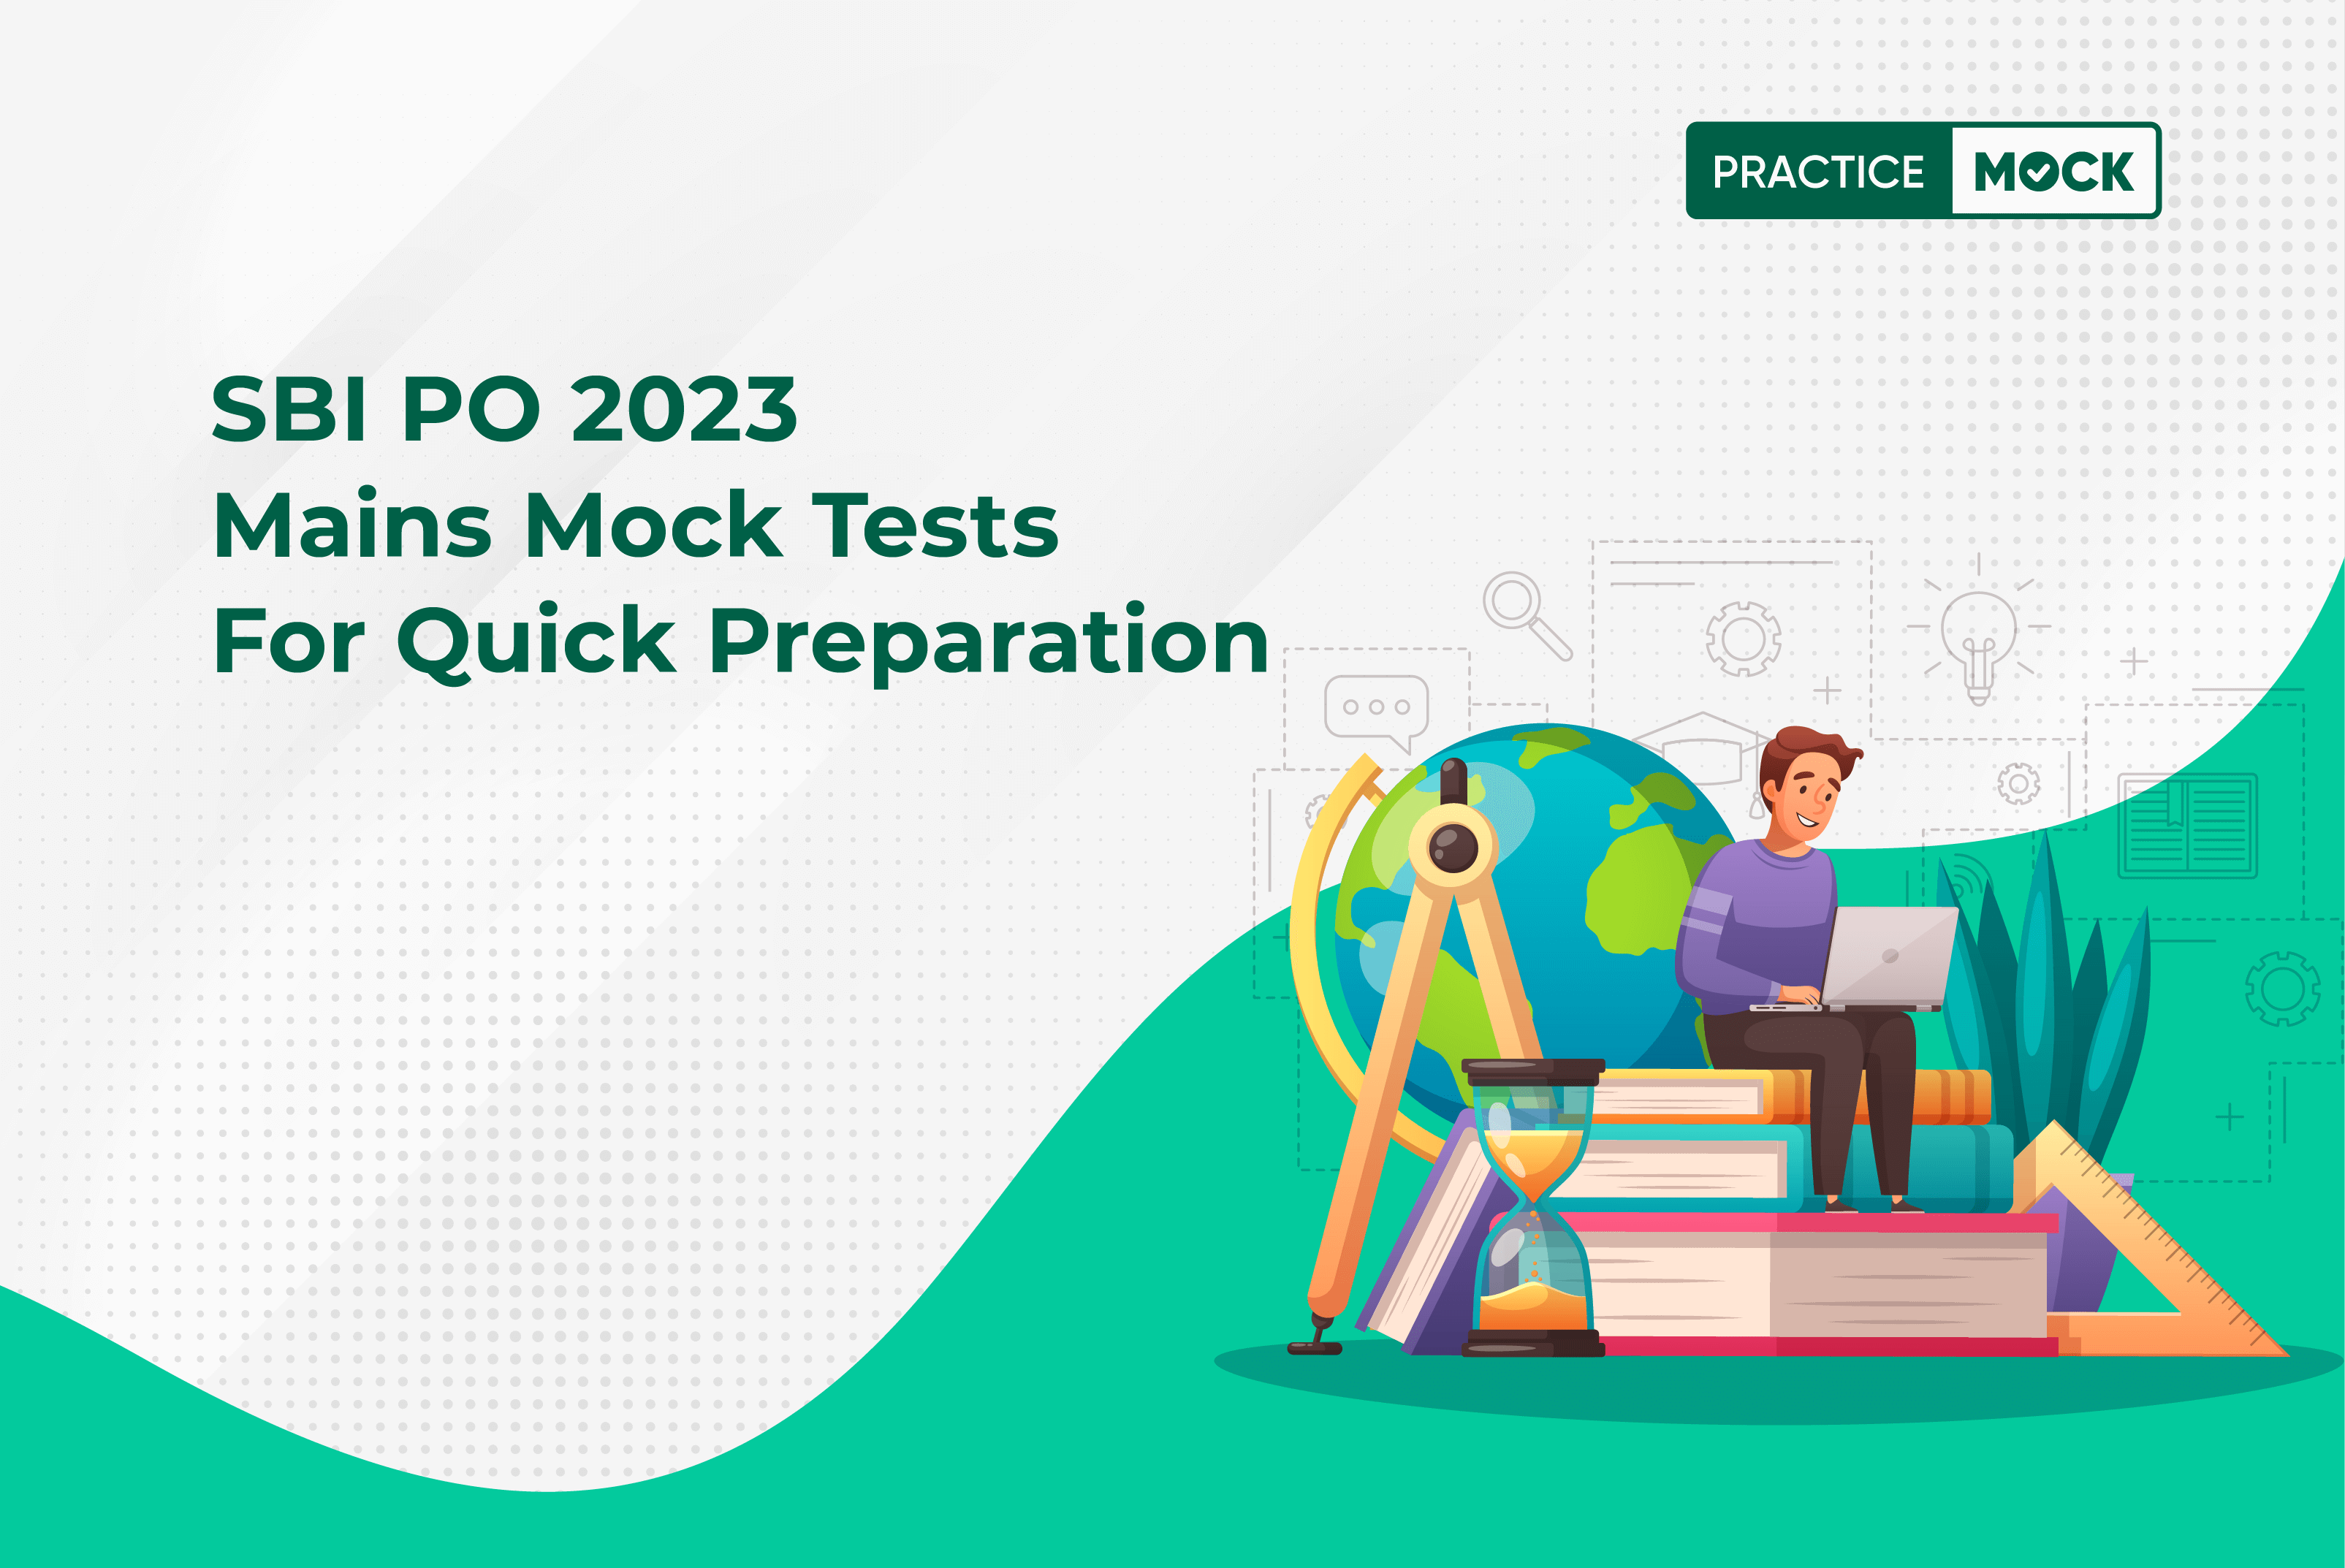 SBI PO 2023 Main Exam Syllabus-How to quickly Revise it?